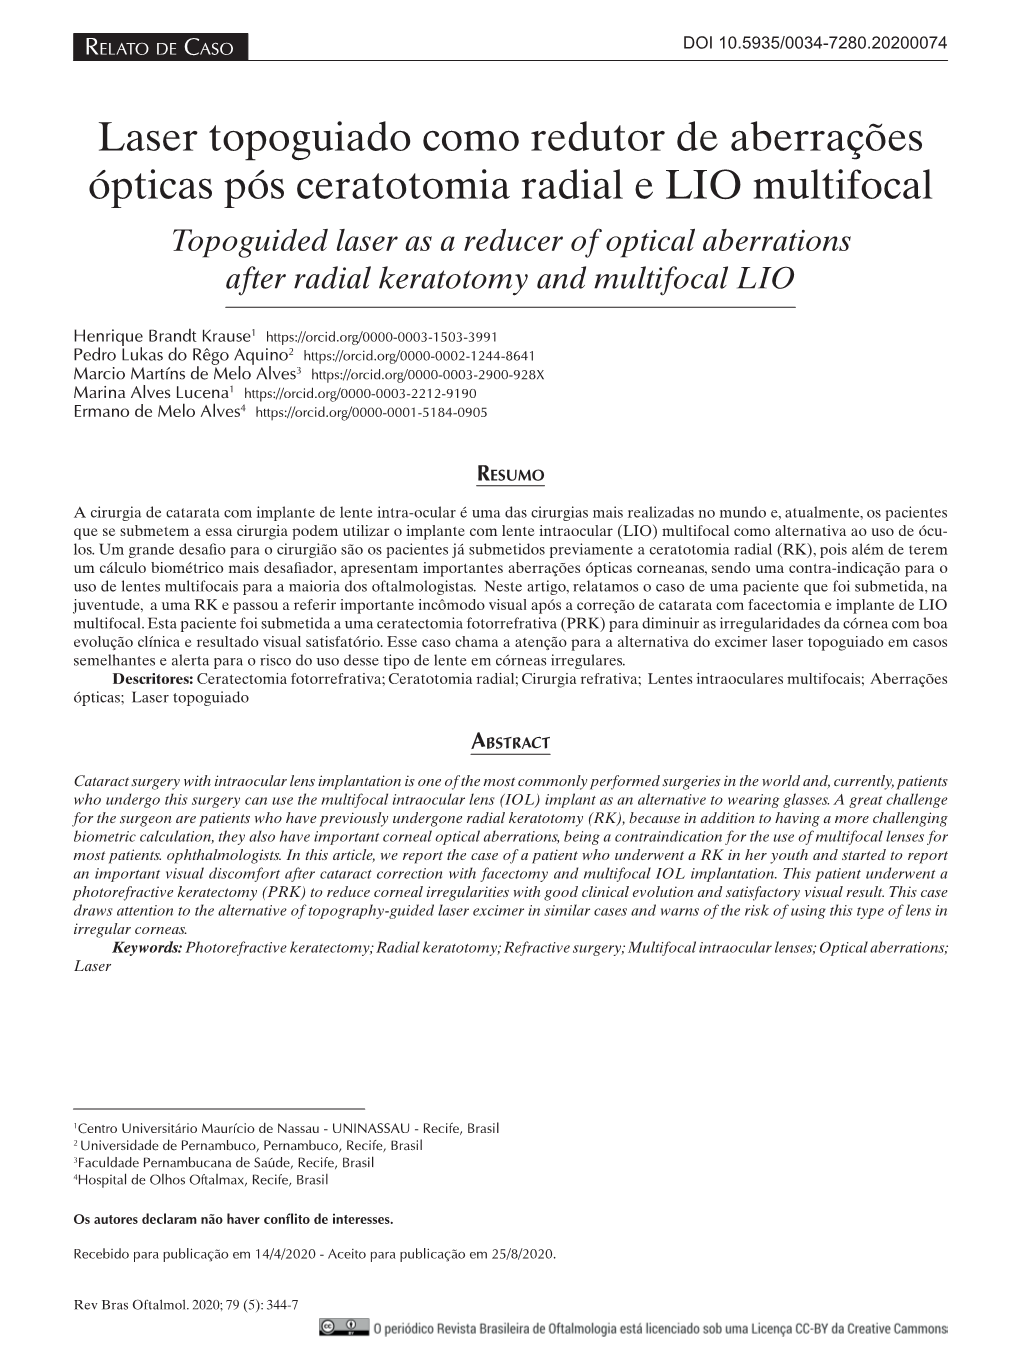 Topoguided Laser As a Reducer of Optical Aberrations After Radial Keratotomy and Multifocal LIO